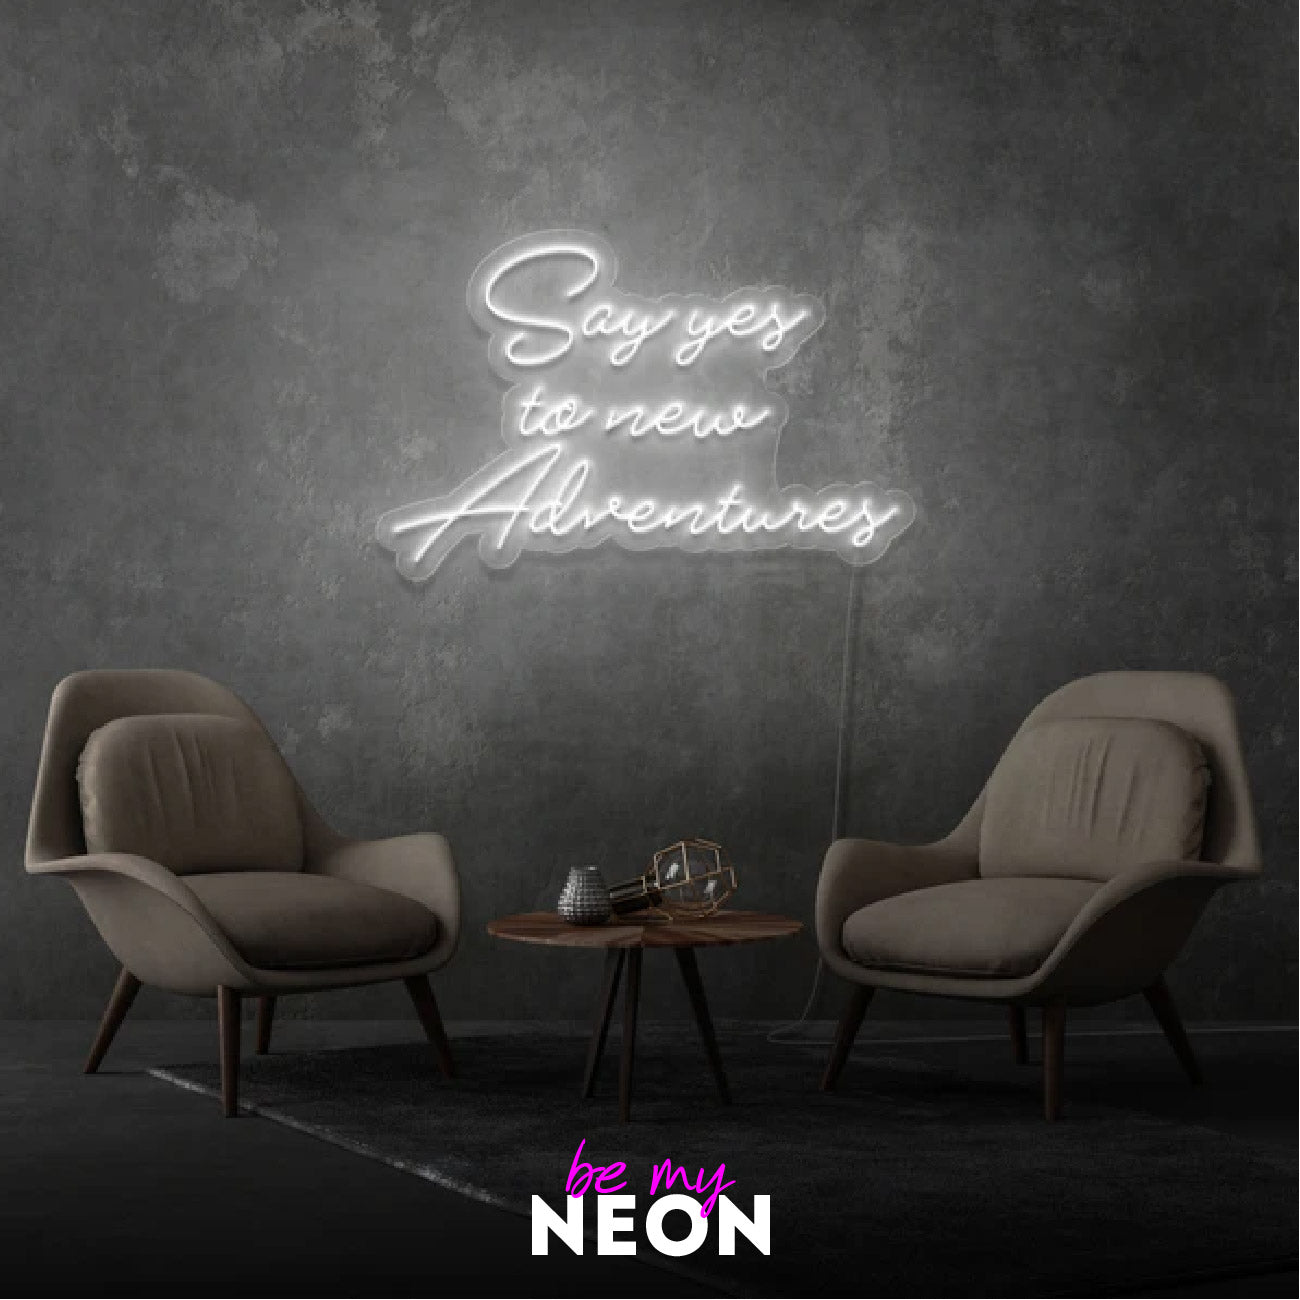 "Say Yes To New Adventures" Leuchtmotiv aus LED Neon